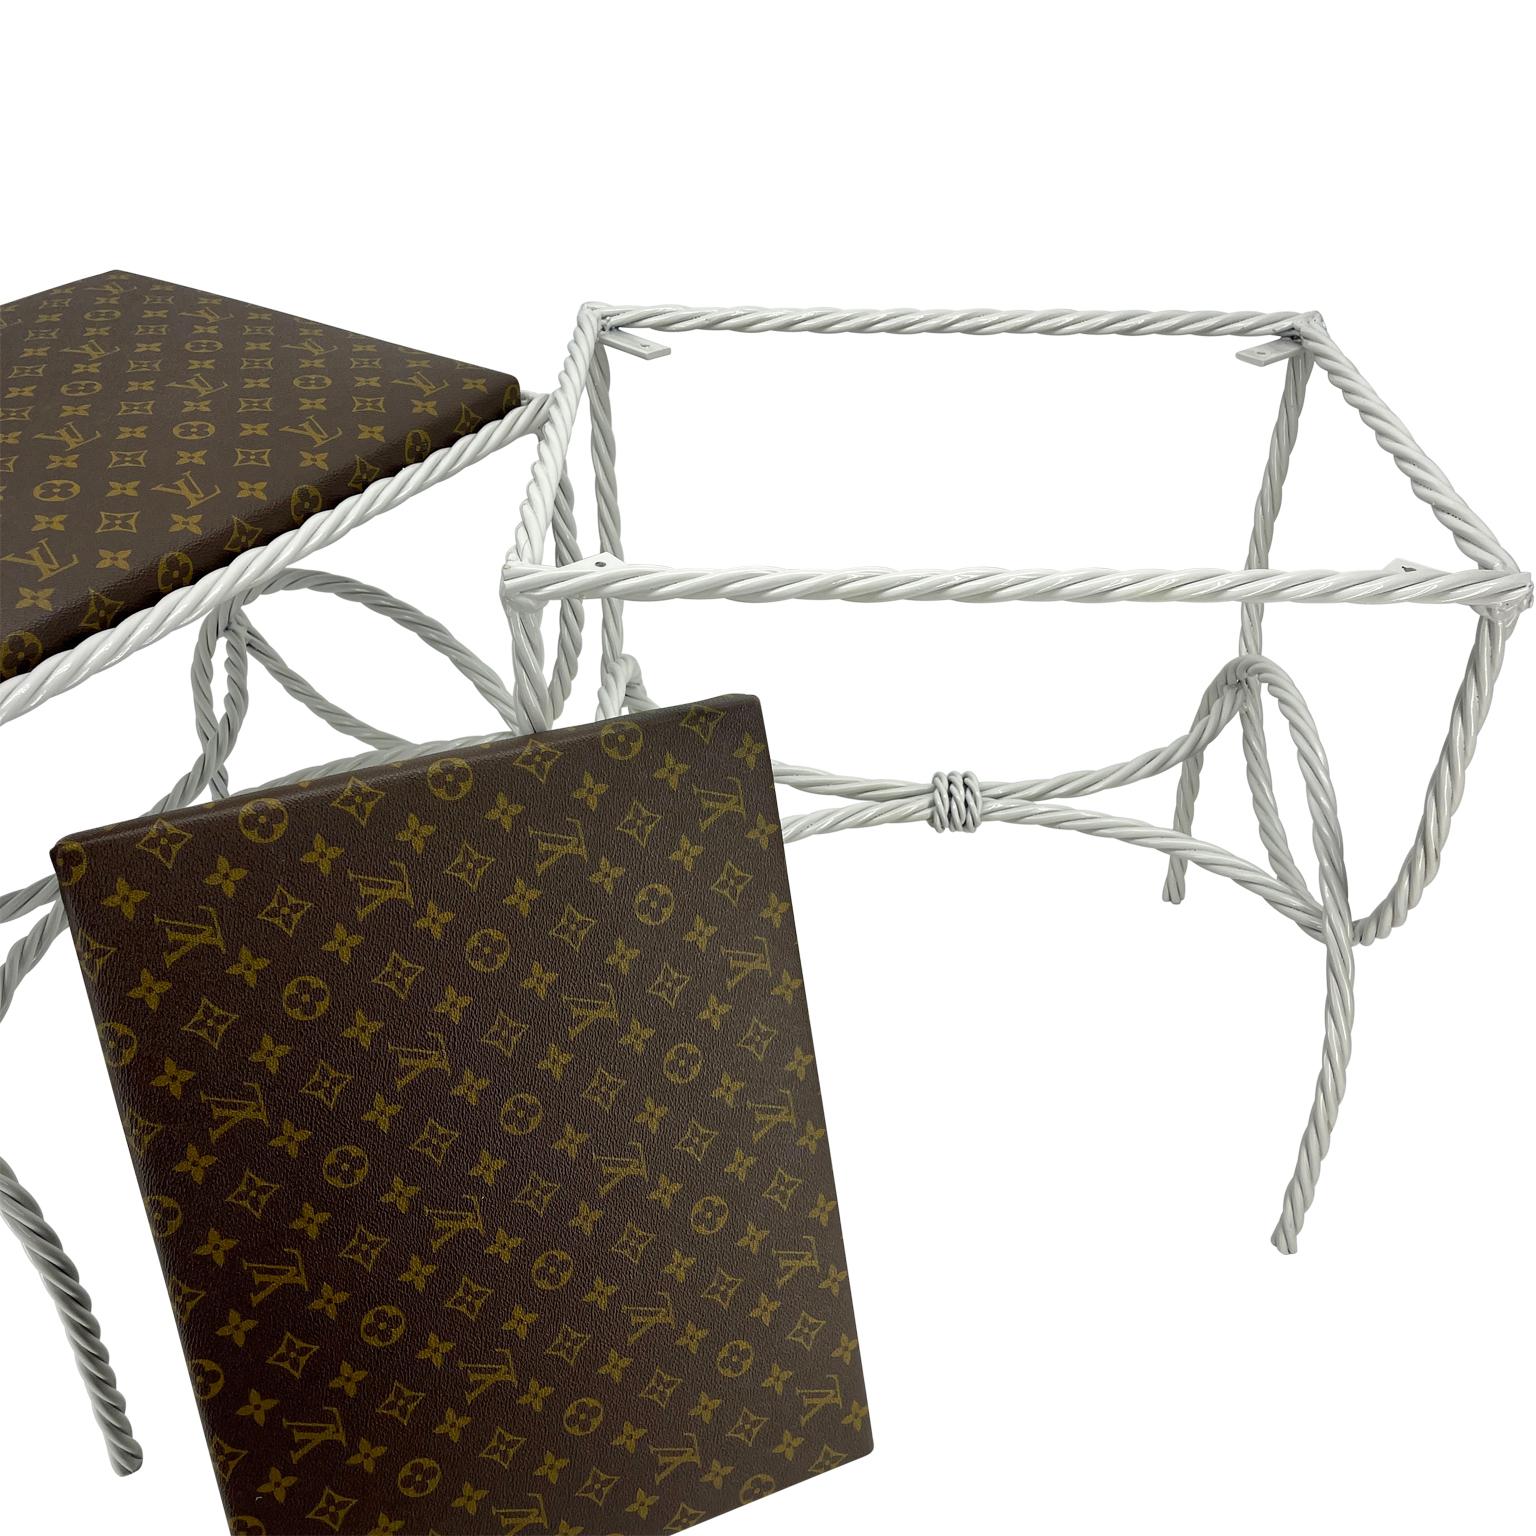 Pair of Roped Iron Benches Side Tables with Louis Vuitton Monogram Fabric For Sale 3